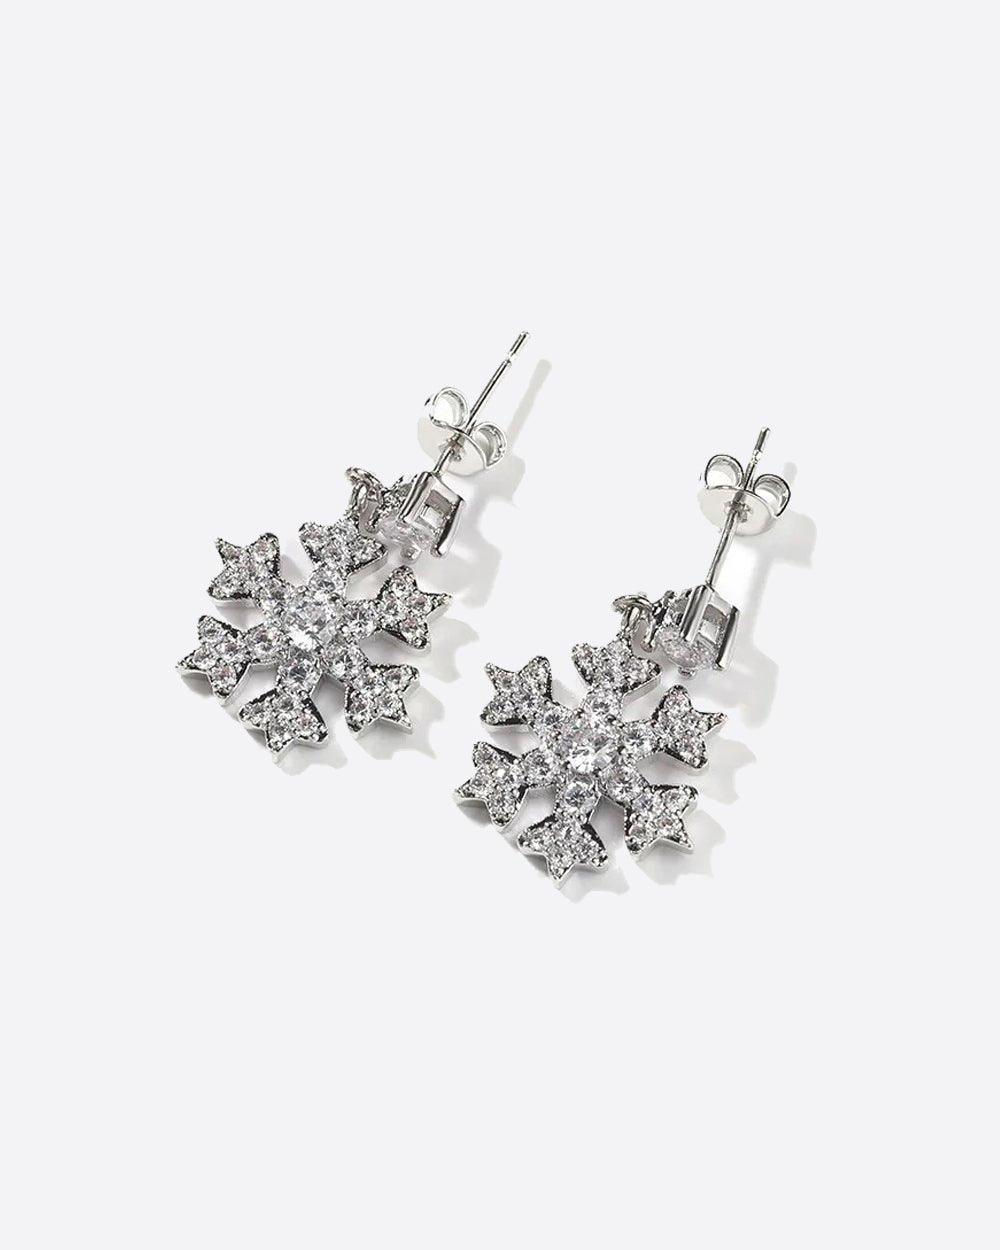 ICY SNOWFLAKE EARRINGS. - WHITE GOLD - DRIP IN THE JEWEL